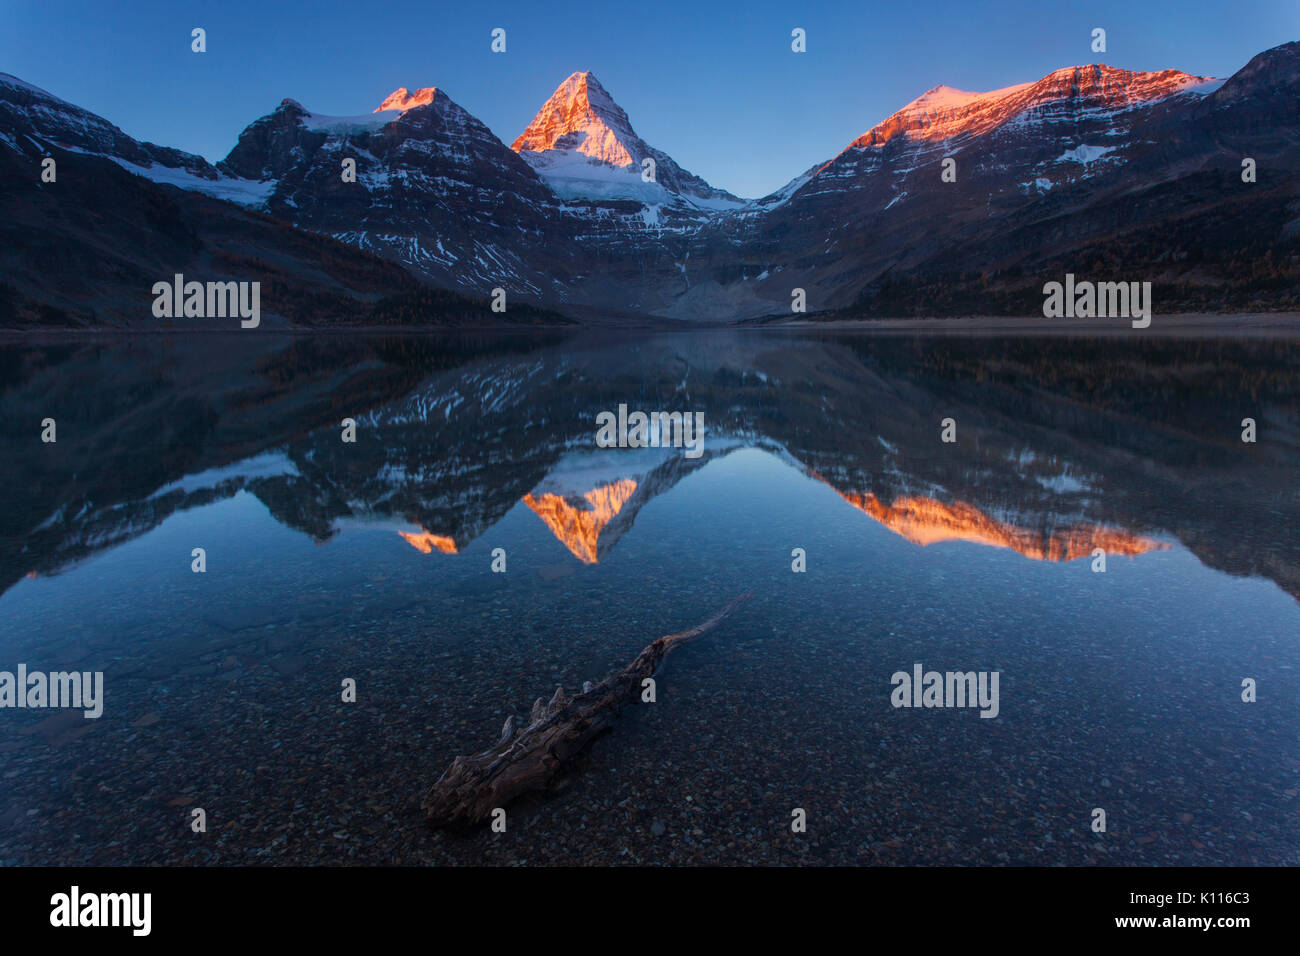 Mount Assiniboine reflected in Lage Magog at sunrise, Mount Assiniboine Provincial Park, Rocky Mountains, British Columbia, Canada. Stock Photo